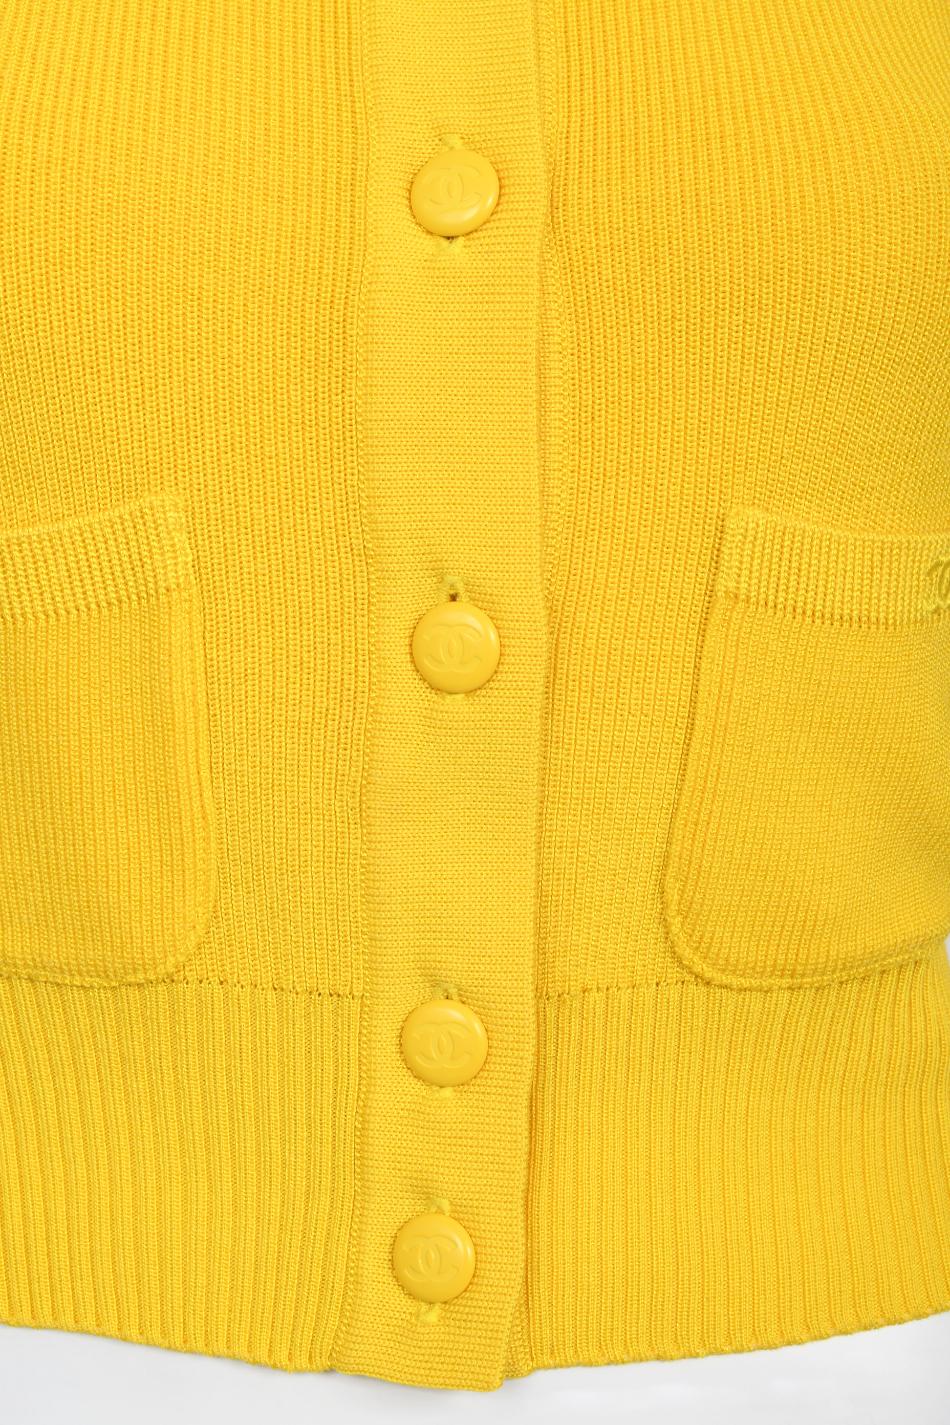 Women's Vintage 1996 Chanel by Karl Lagerfeld Runway Yellow Knit Cropped Sweater Set 